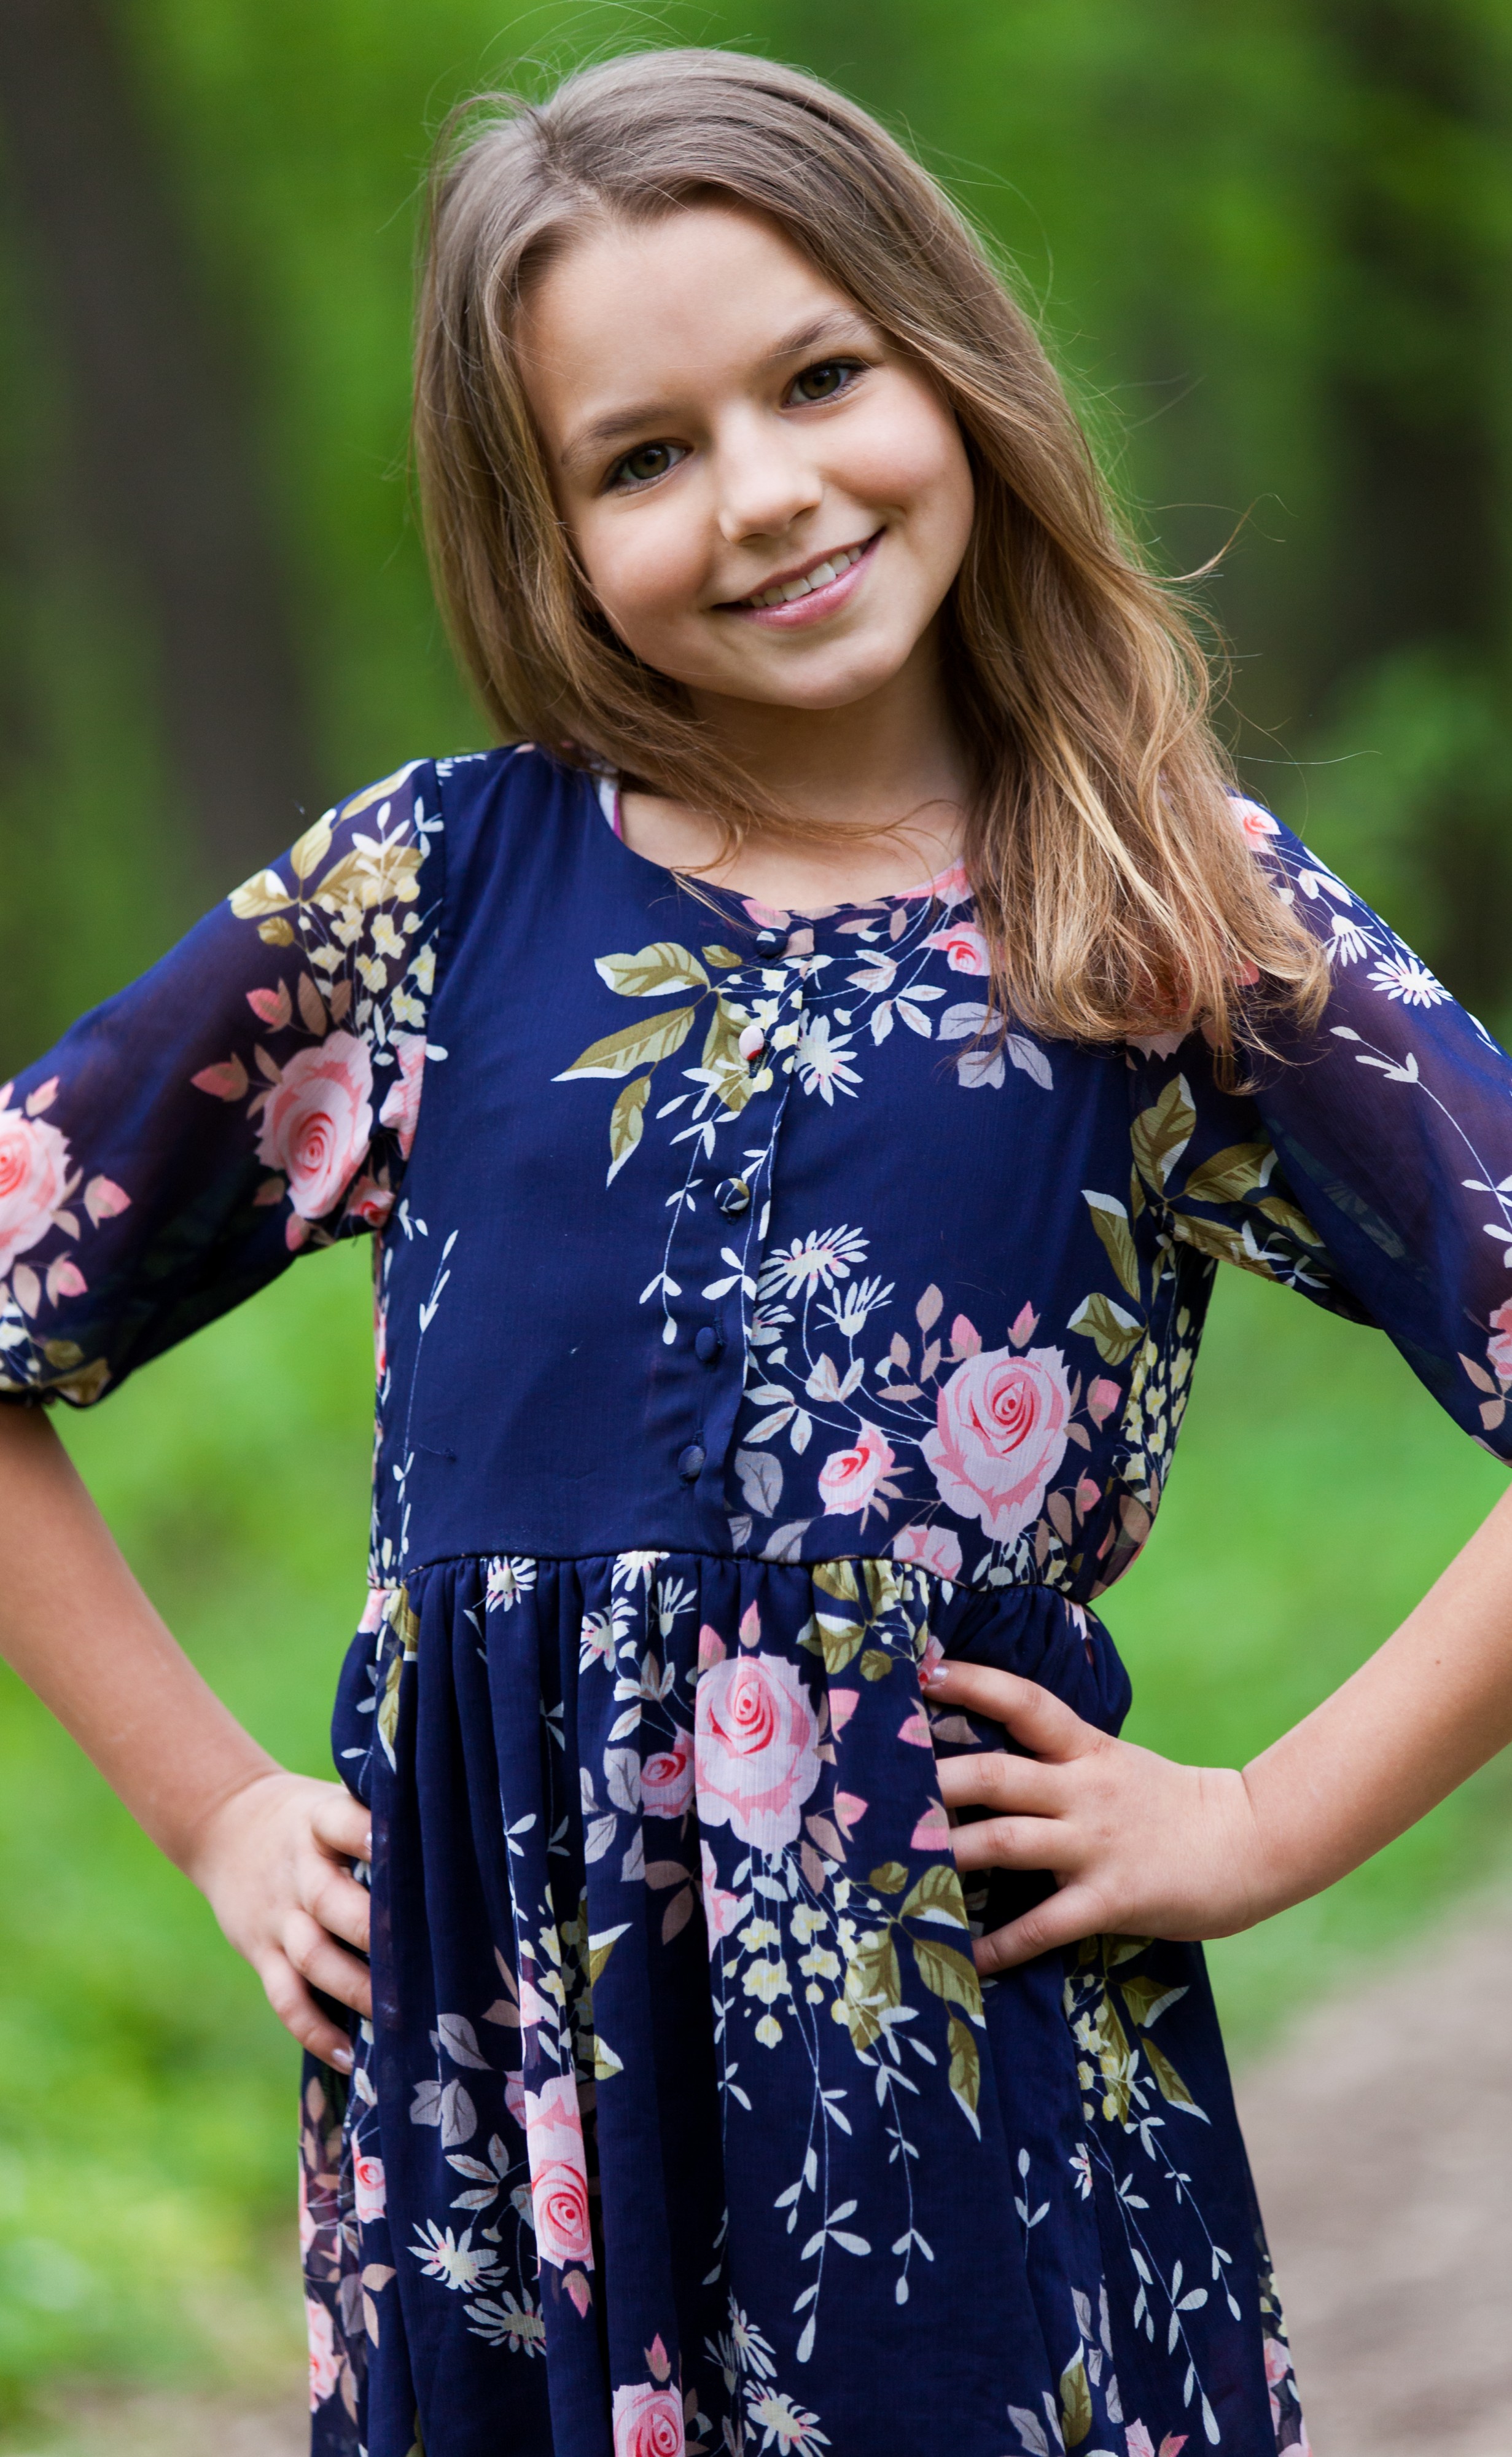 Photo of a cute 12yearold girl photographed in May 2015, picture 9